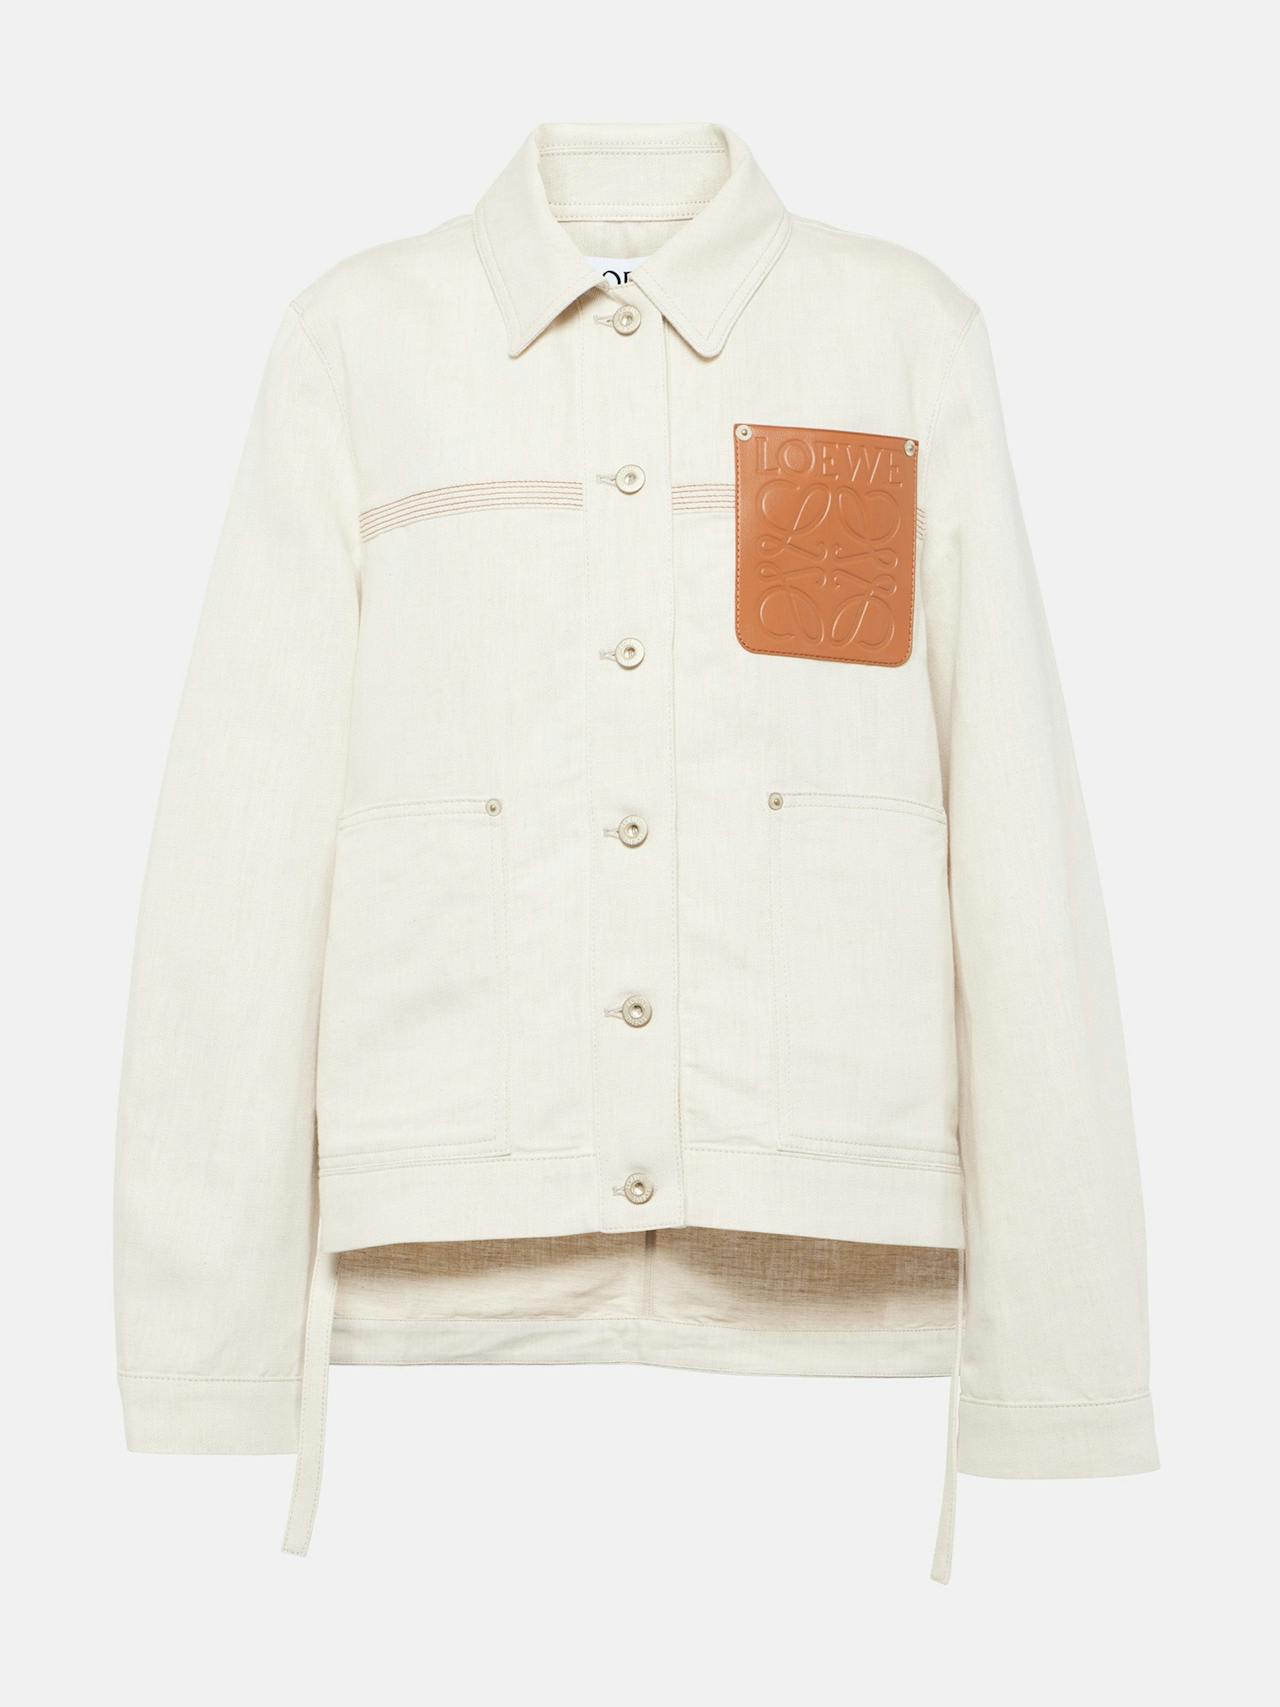 Cotton and linen jacket